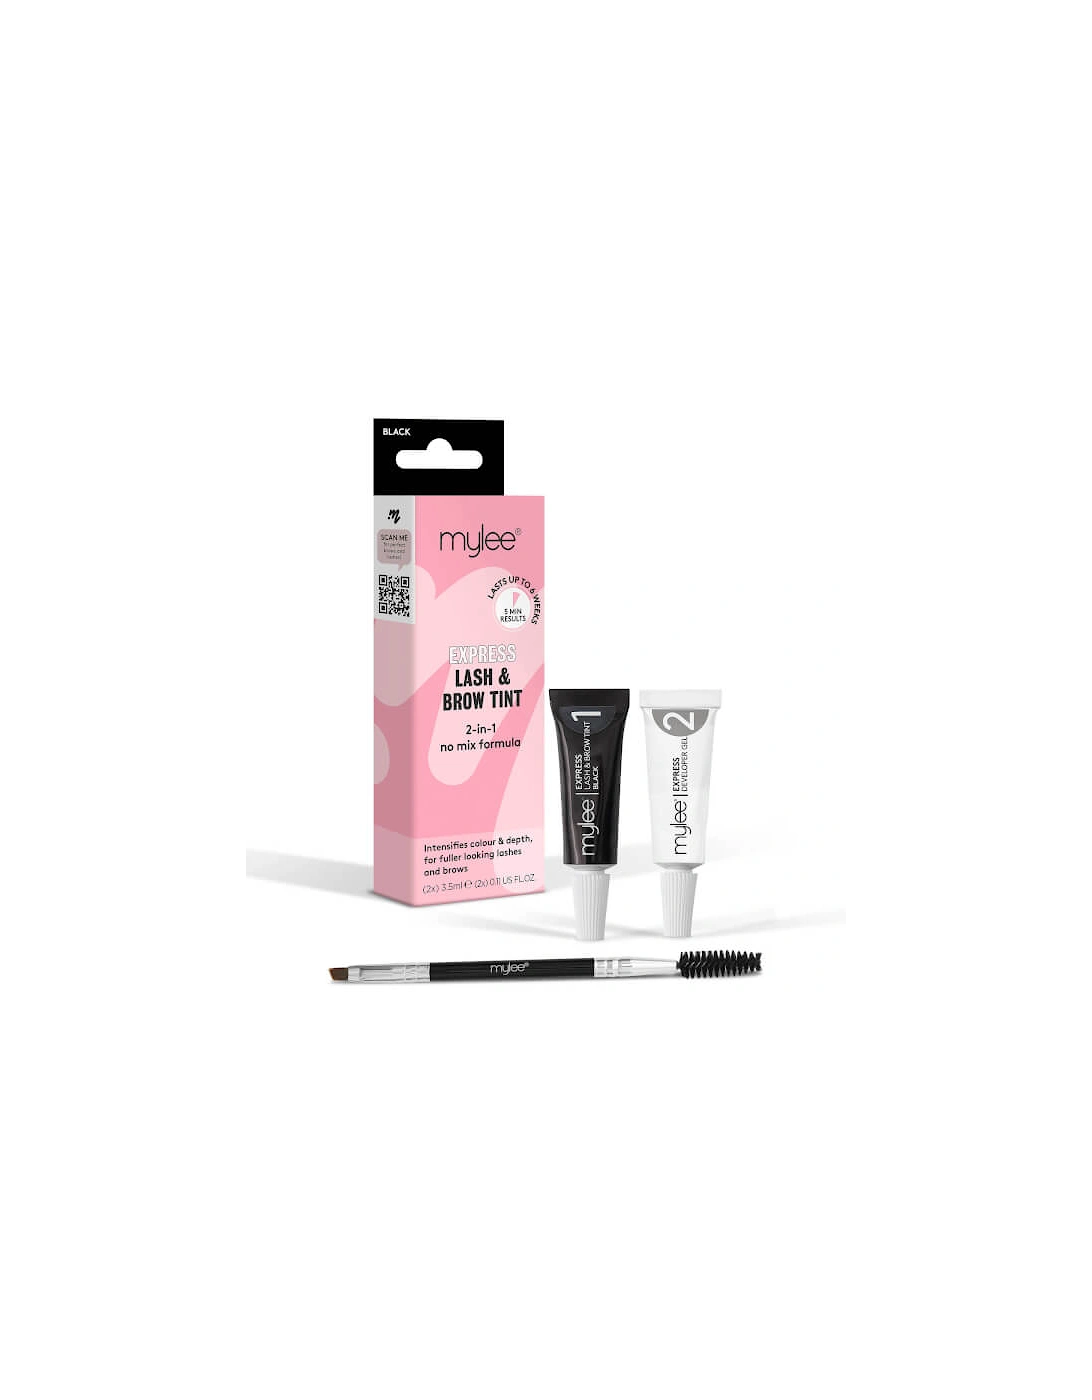 Express 2 in 1 Lash and Brow Tint - Black, 2 of 1